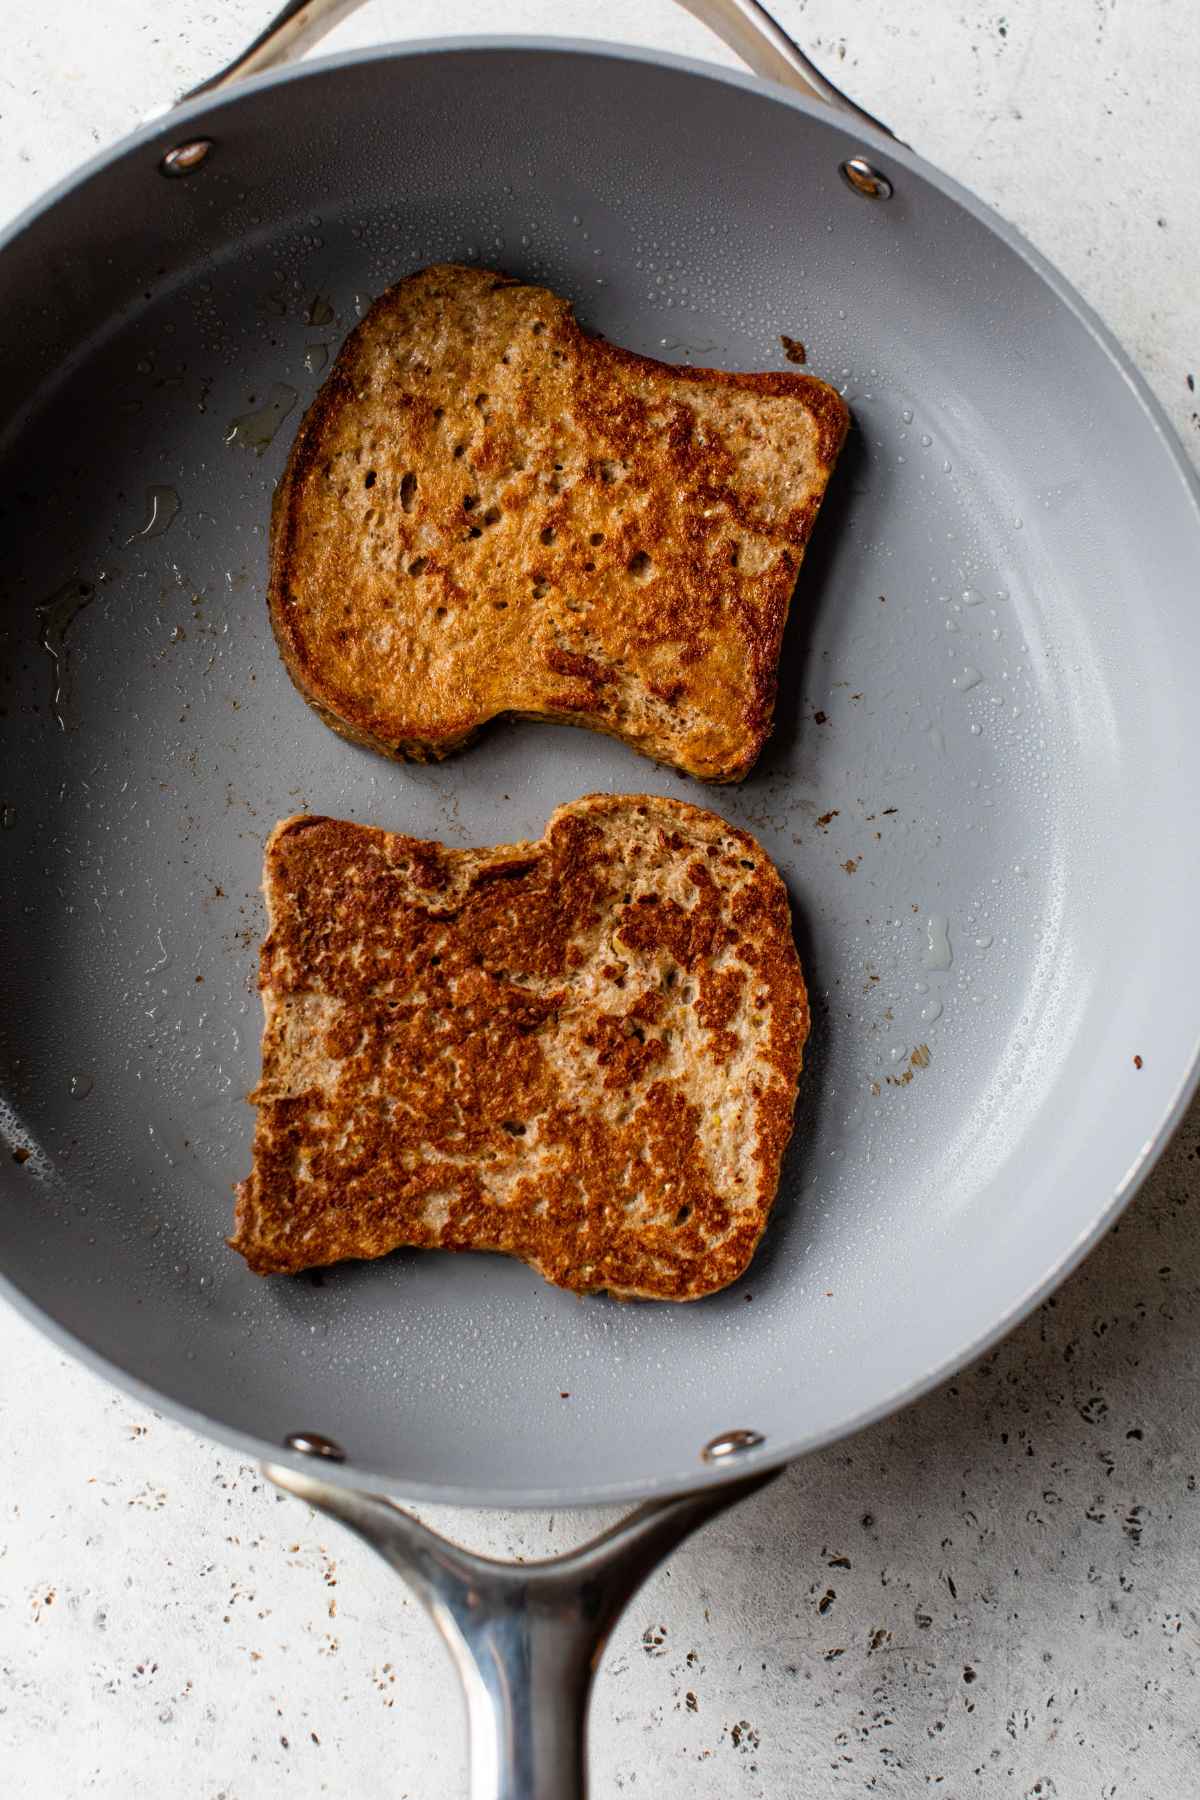 French toast bread slices cooking in a skillet.